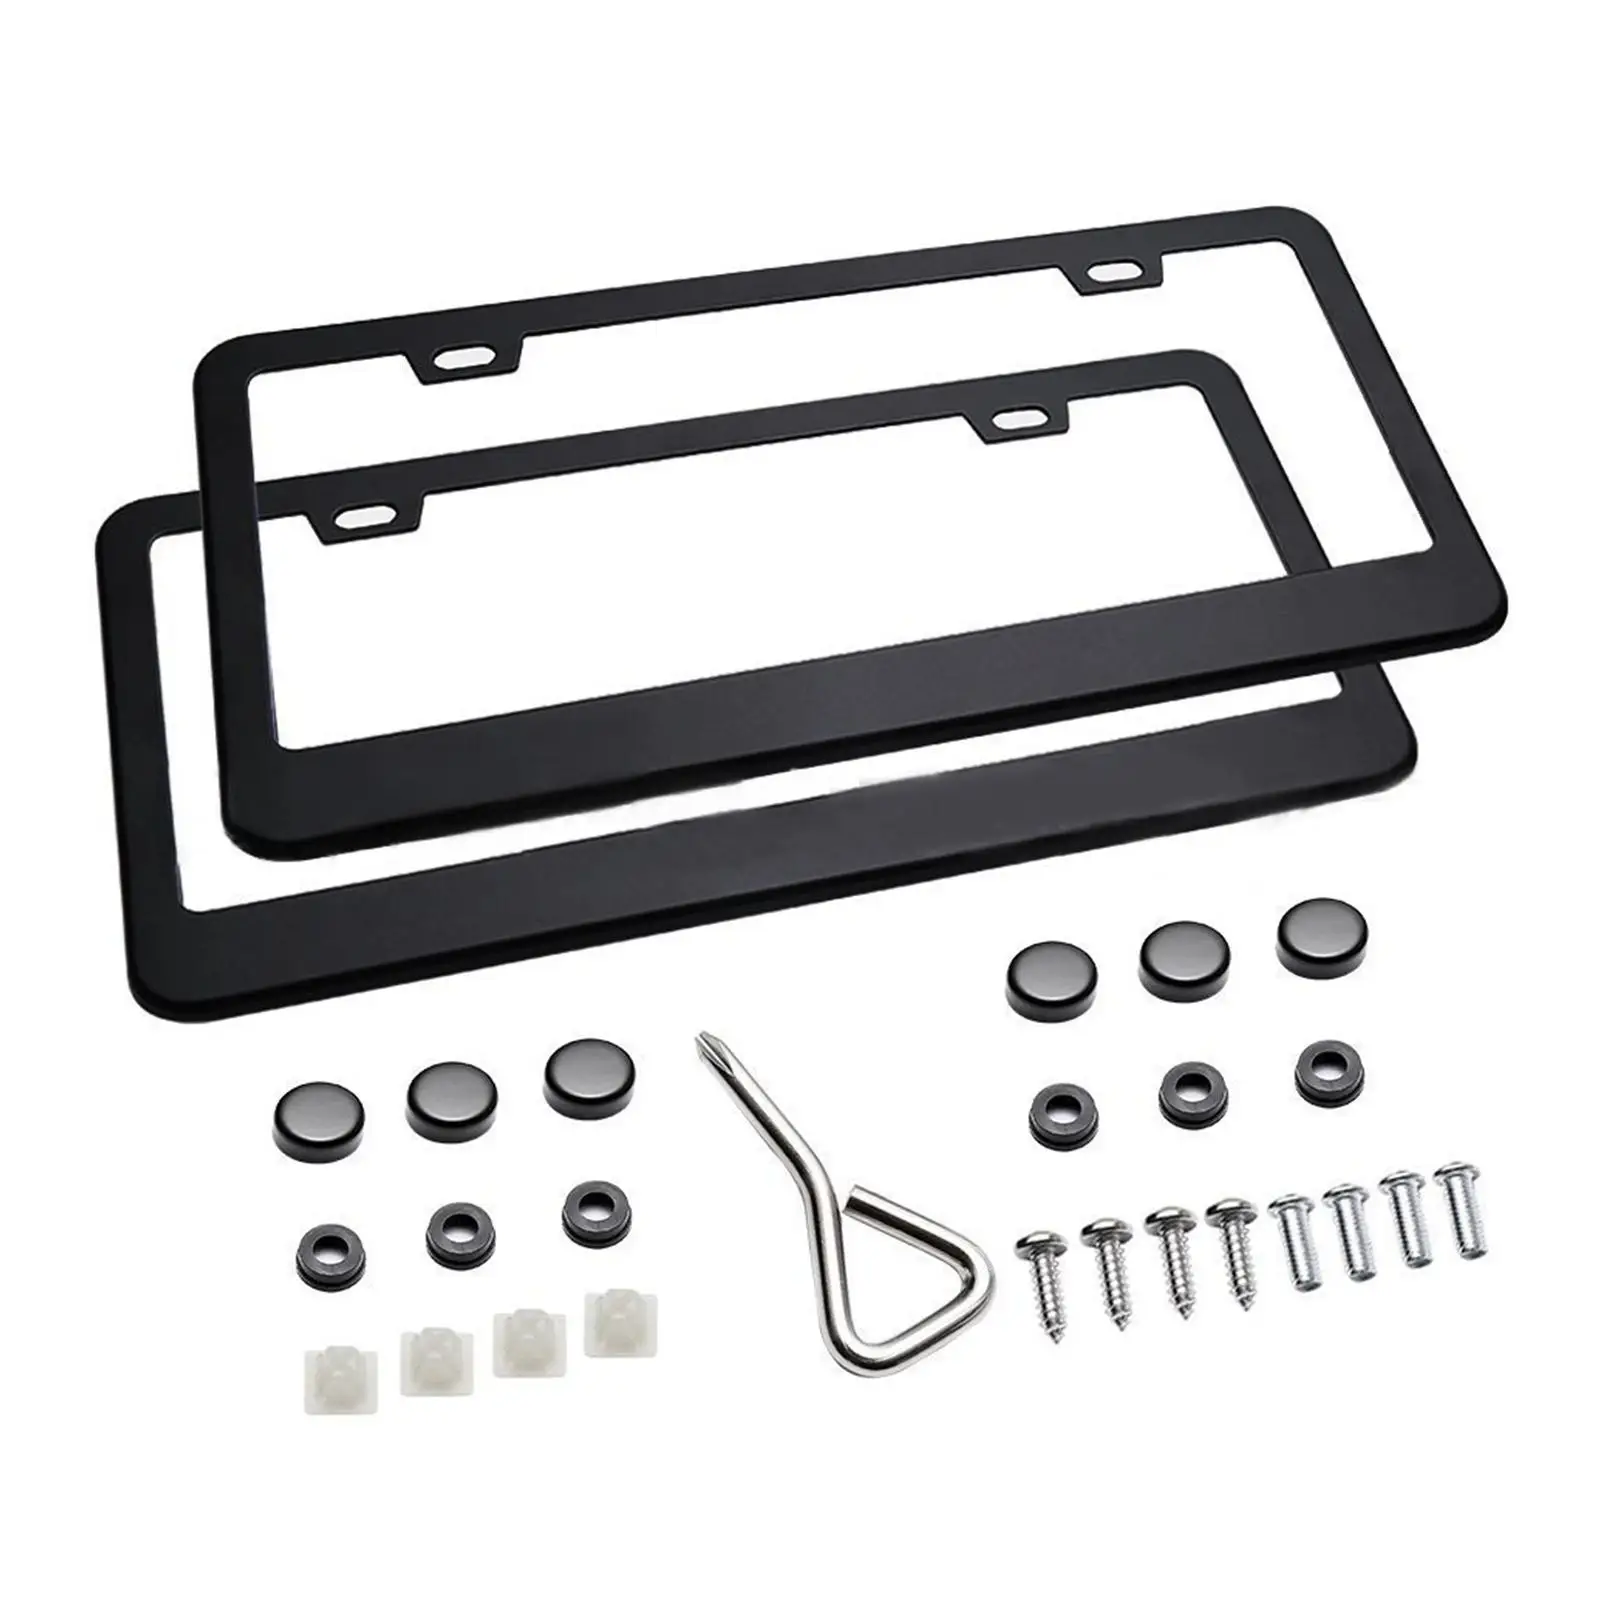 2Pcs License Plate Mounting Frames Universal Protection Sturdy Replacement Parts Number Plate Holder for US Standard Plates